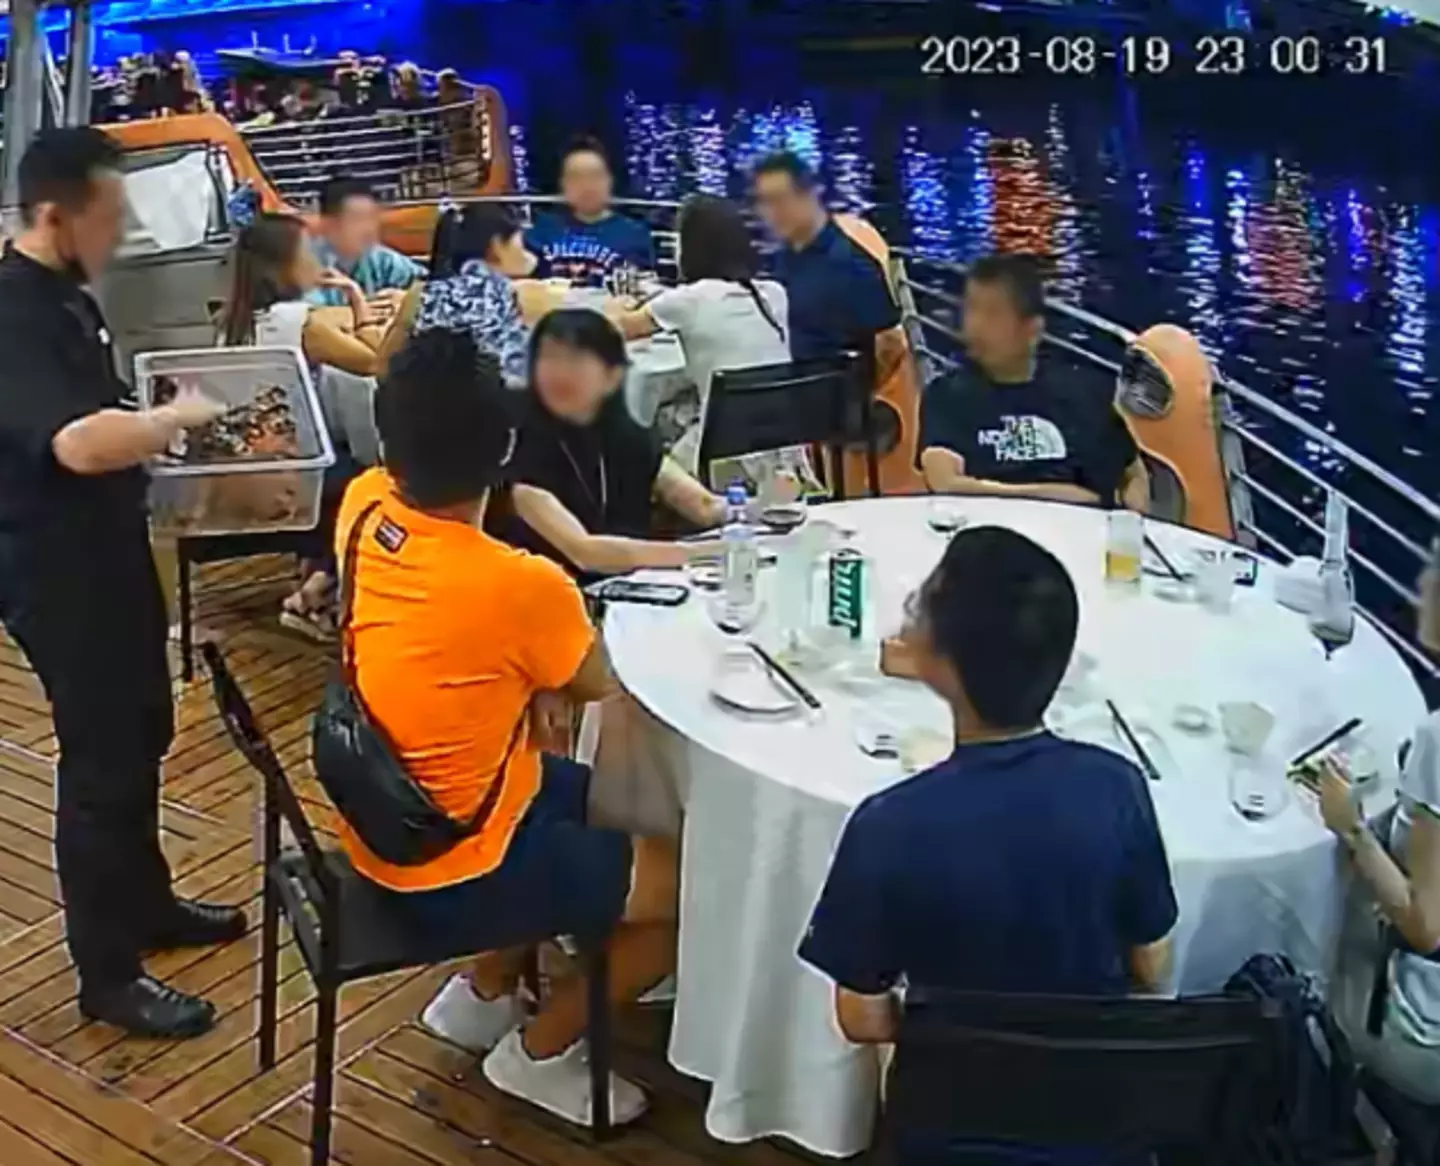 A CCTV image of a waiter showing the table the crab.